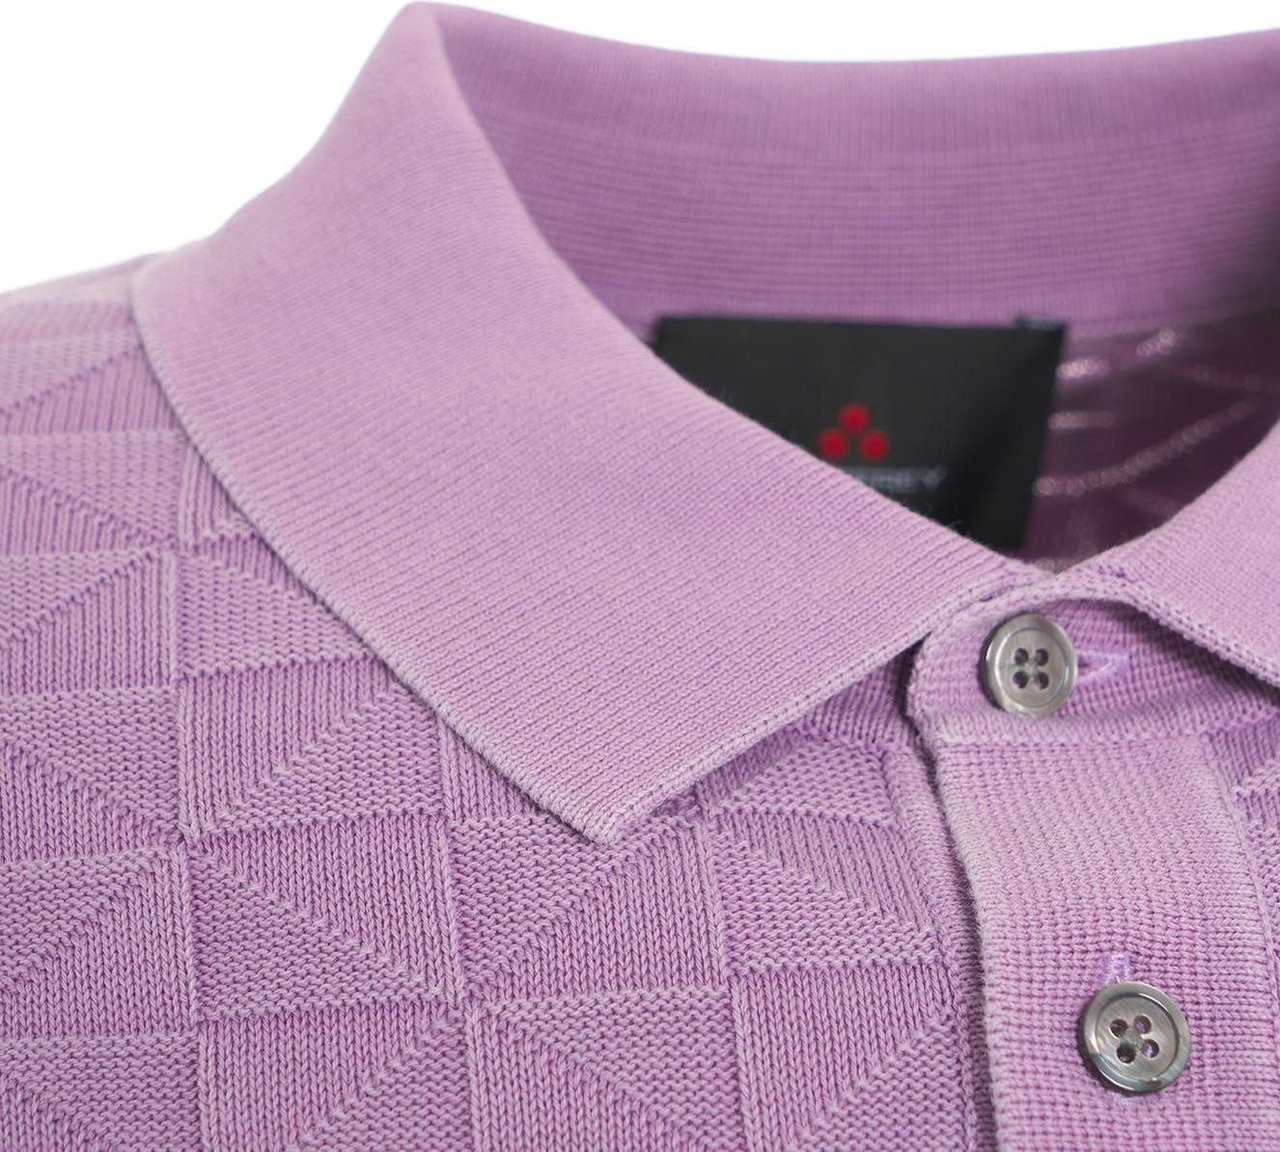 Peuterey Strick polo with pattern Paars